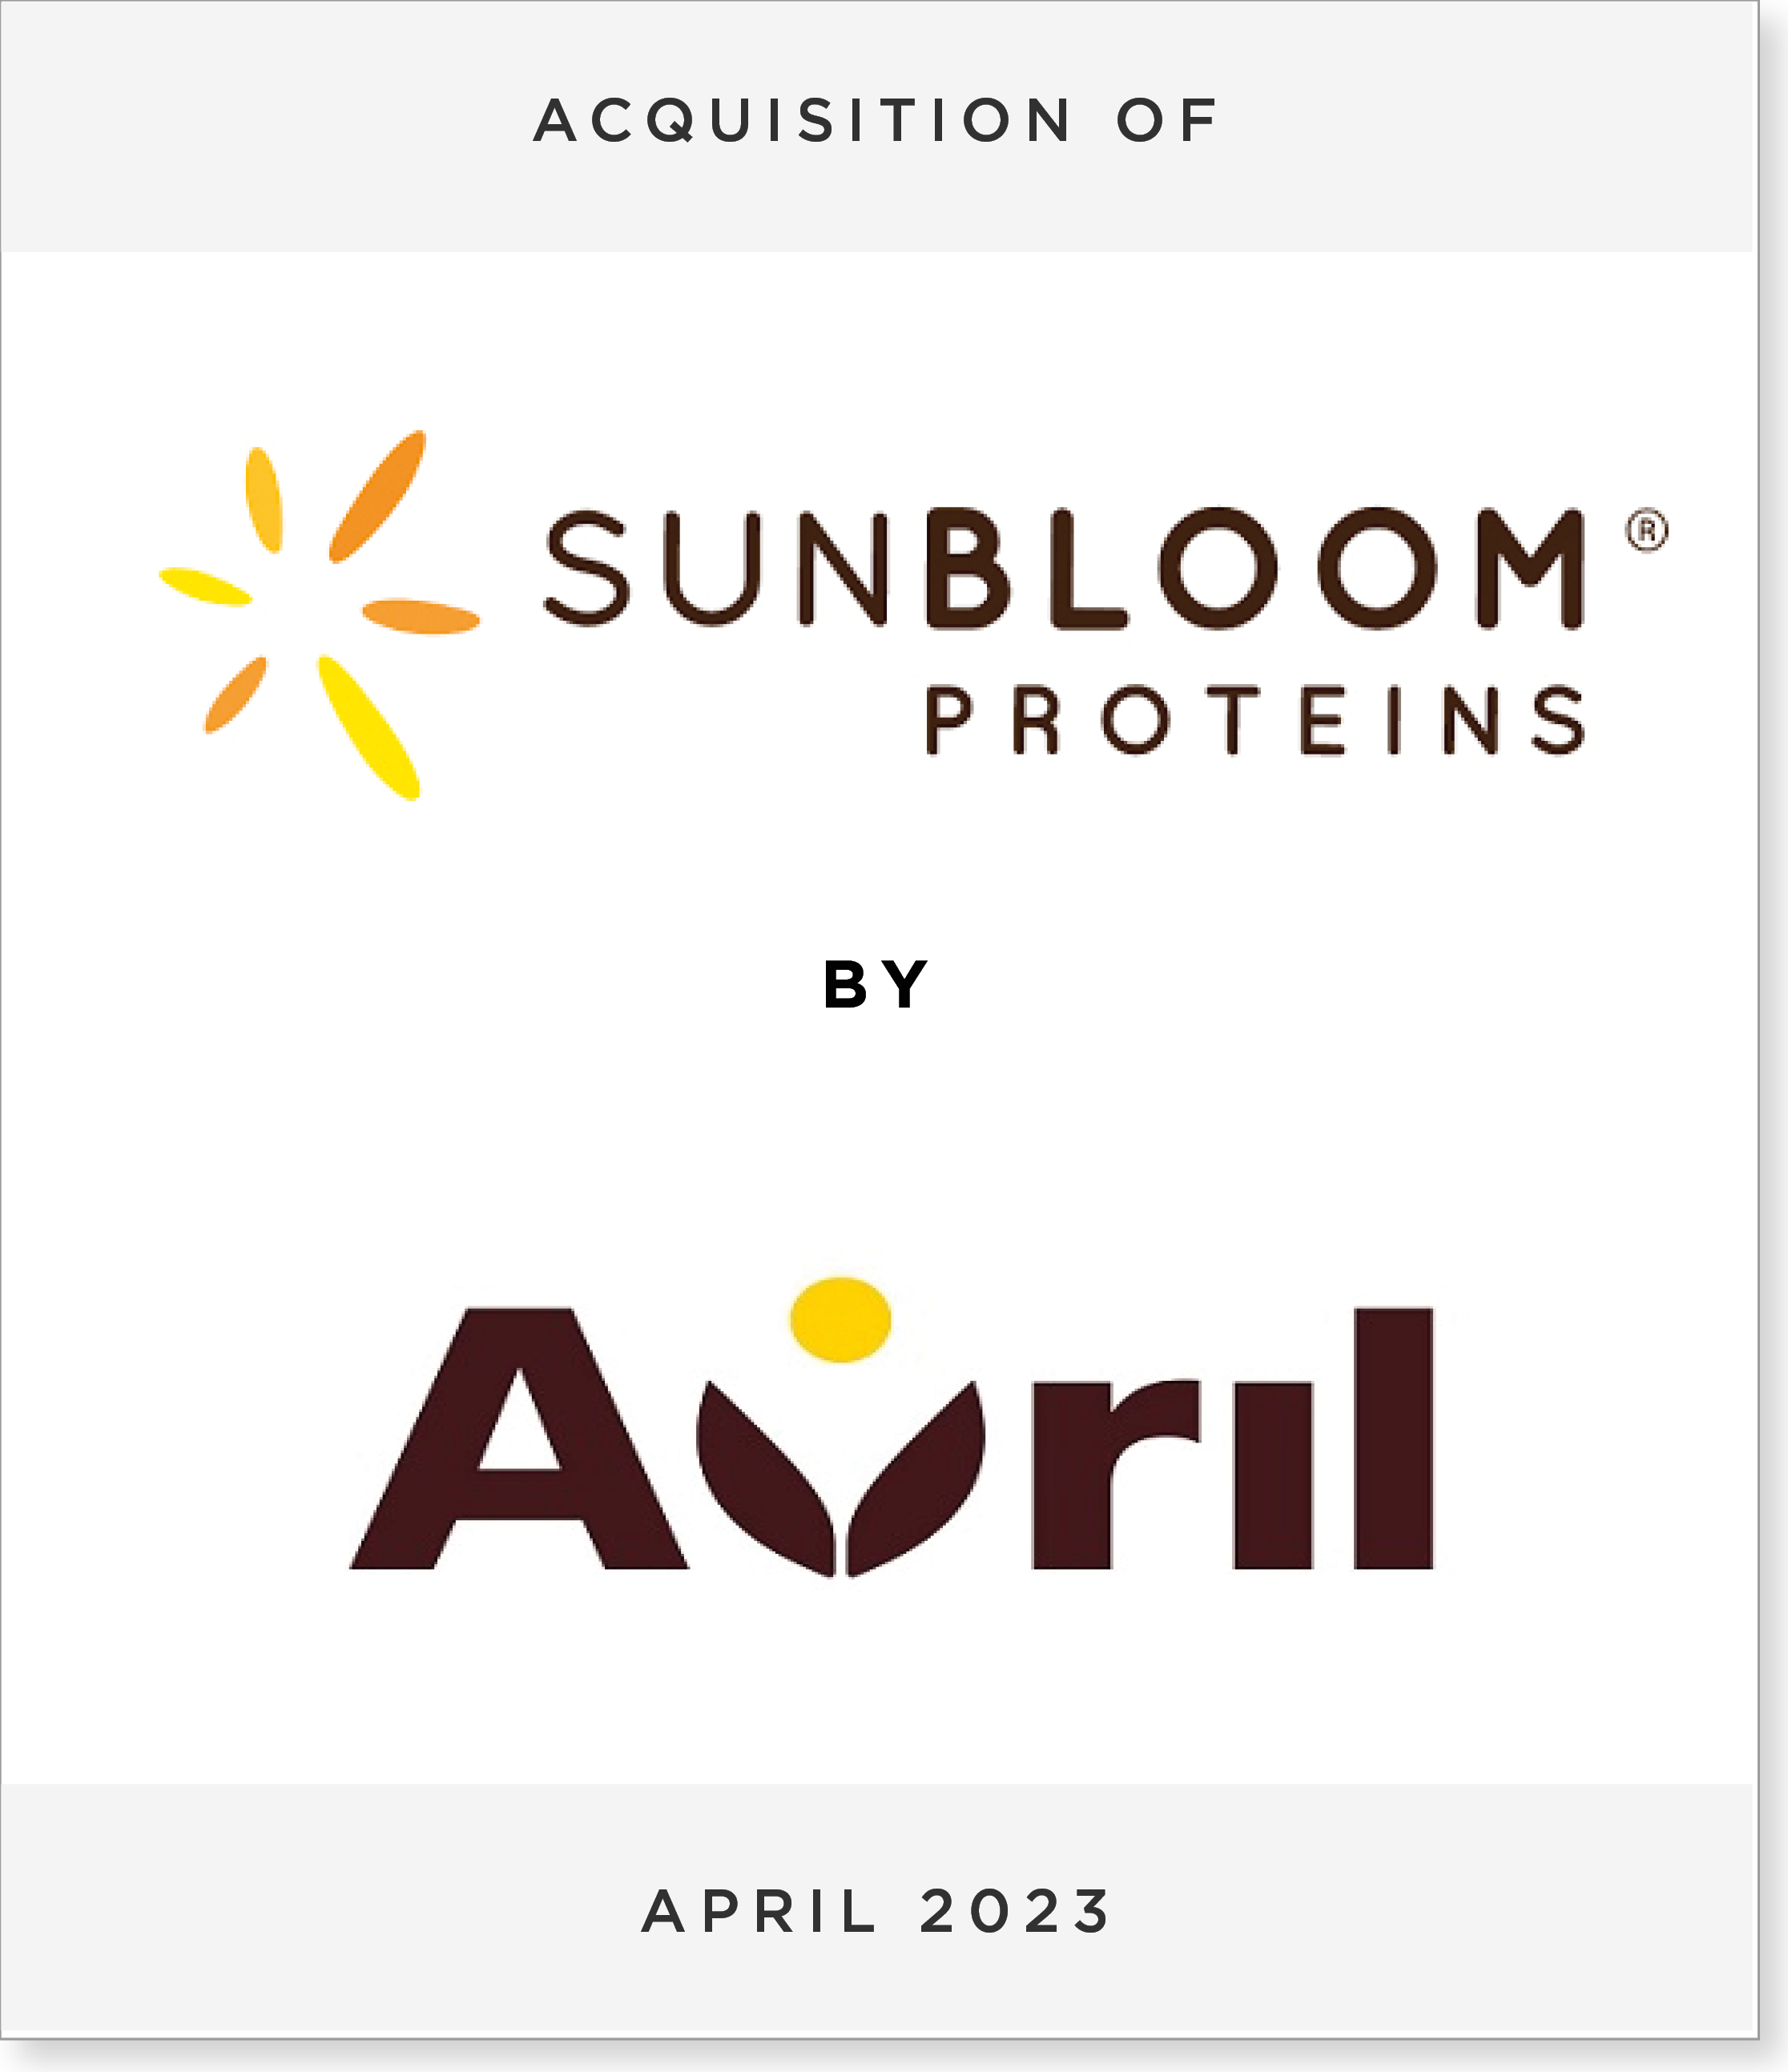 Sunbloom_GroupeAvril_DRAFT Acquisition of Sunbloom Proteins by Avril